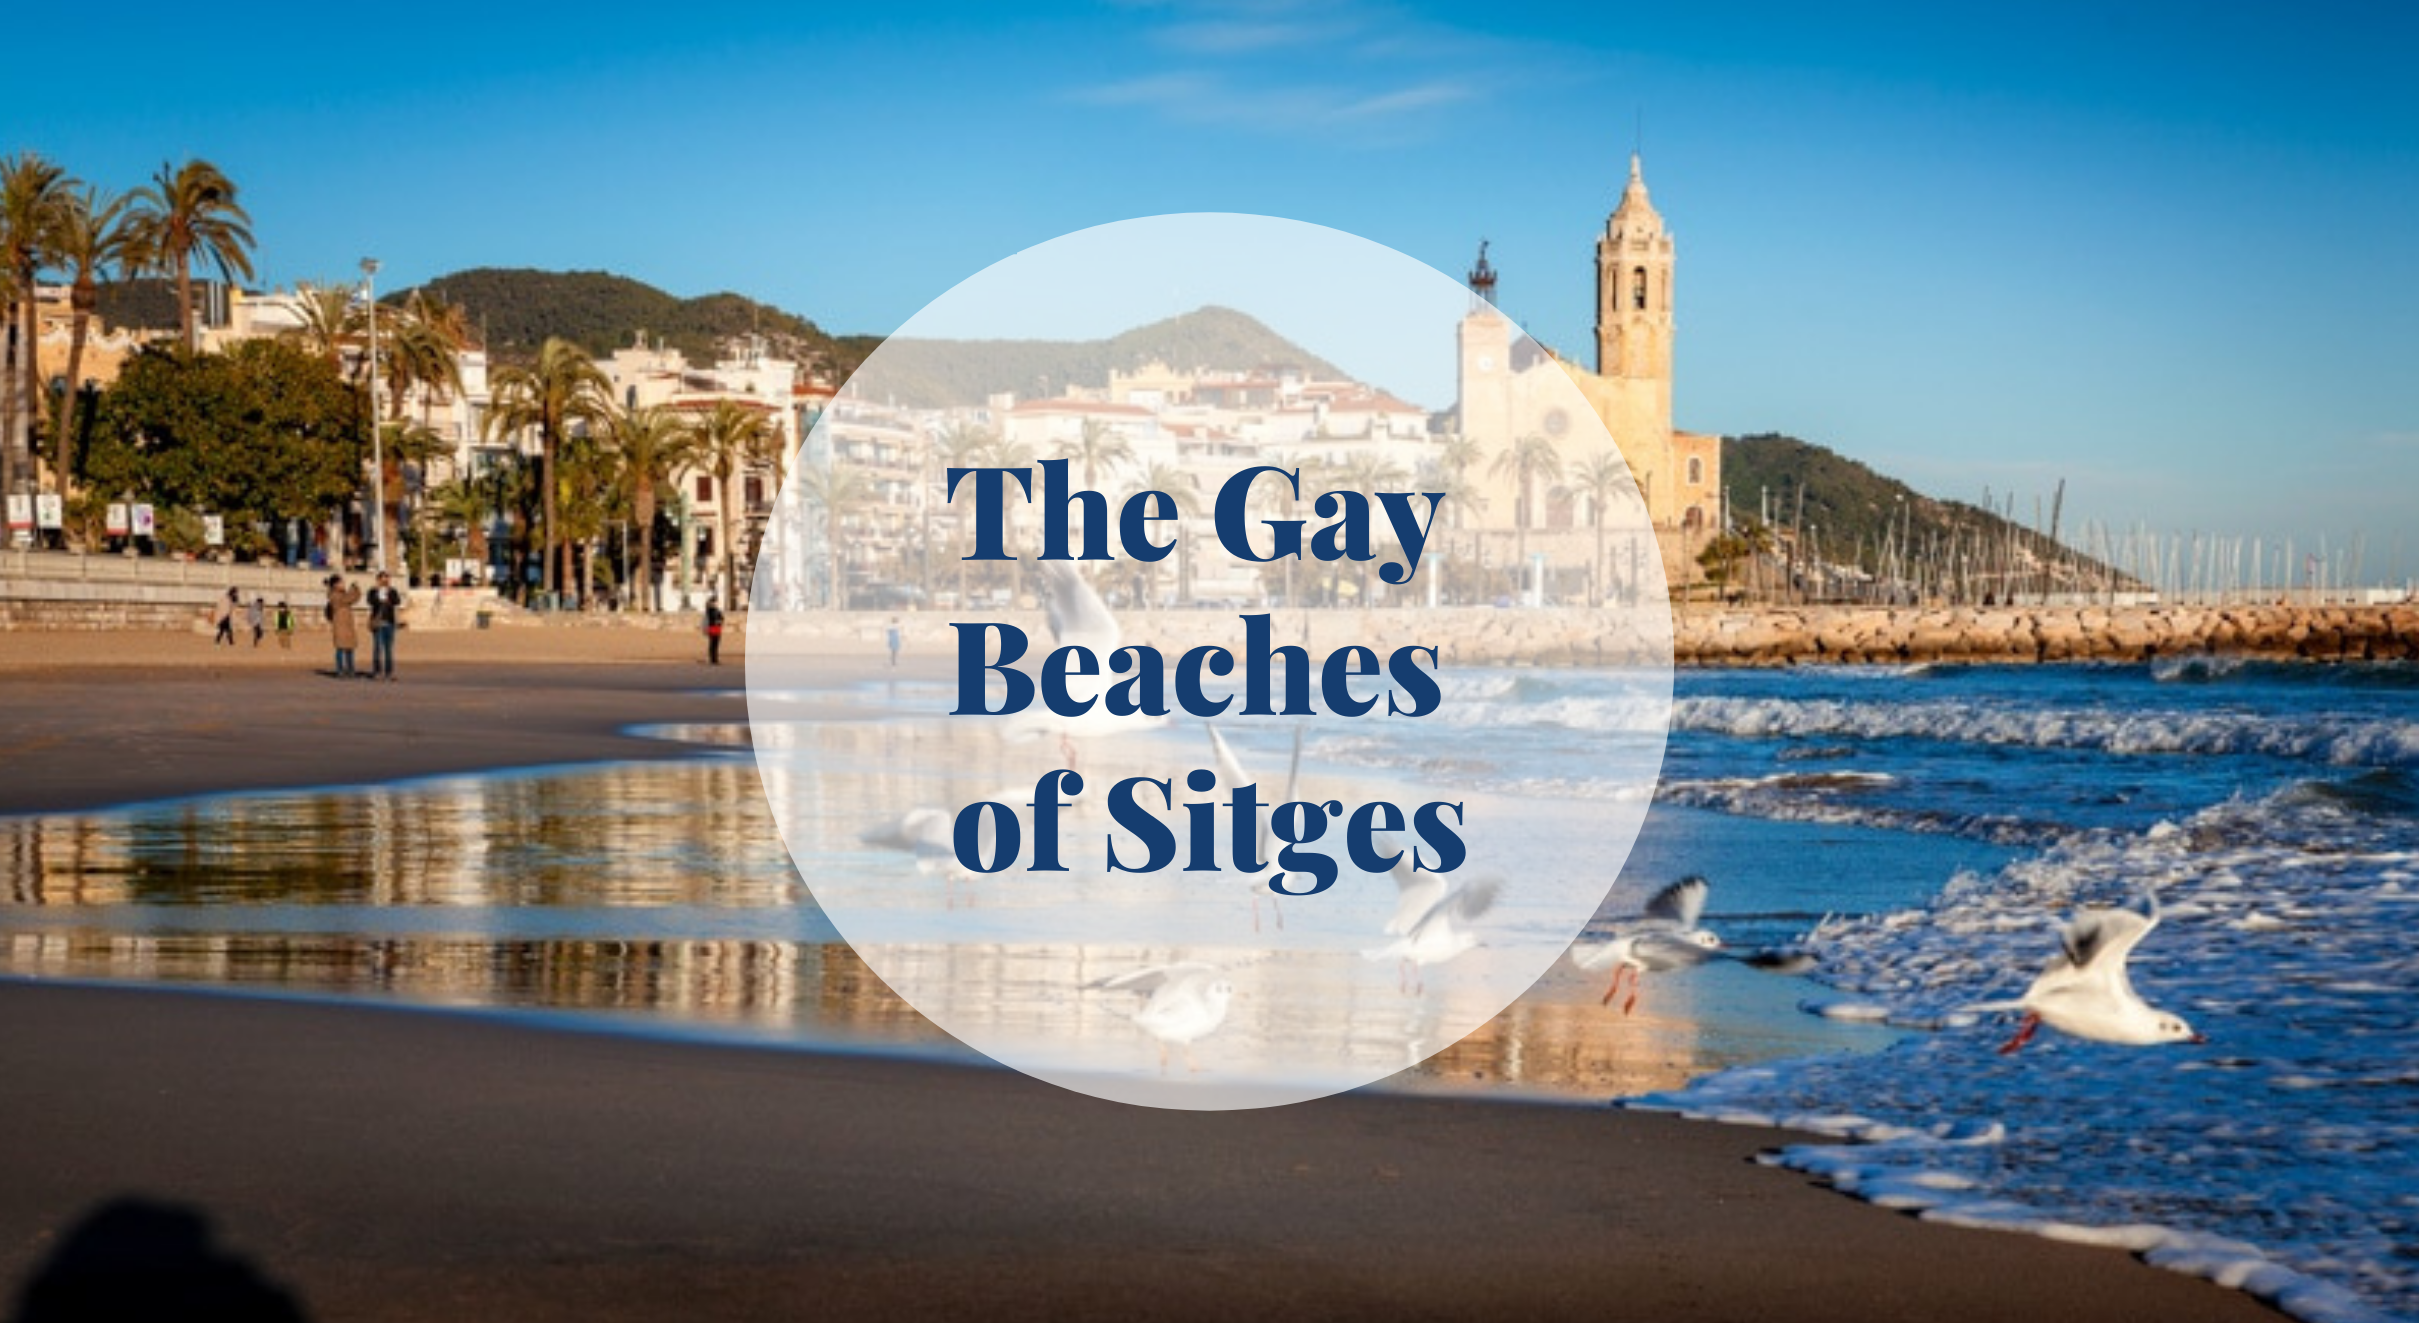 Lets discover the Gay Beaches of Sitges